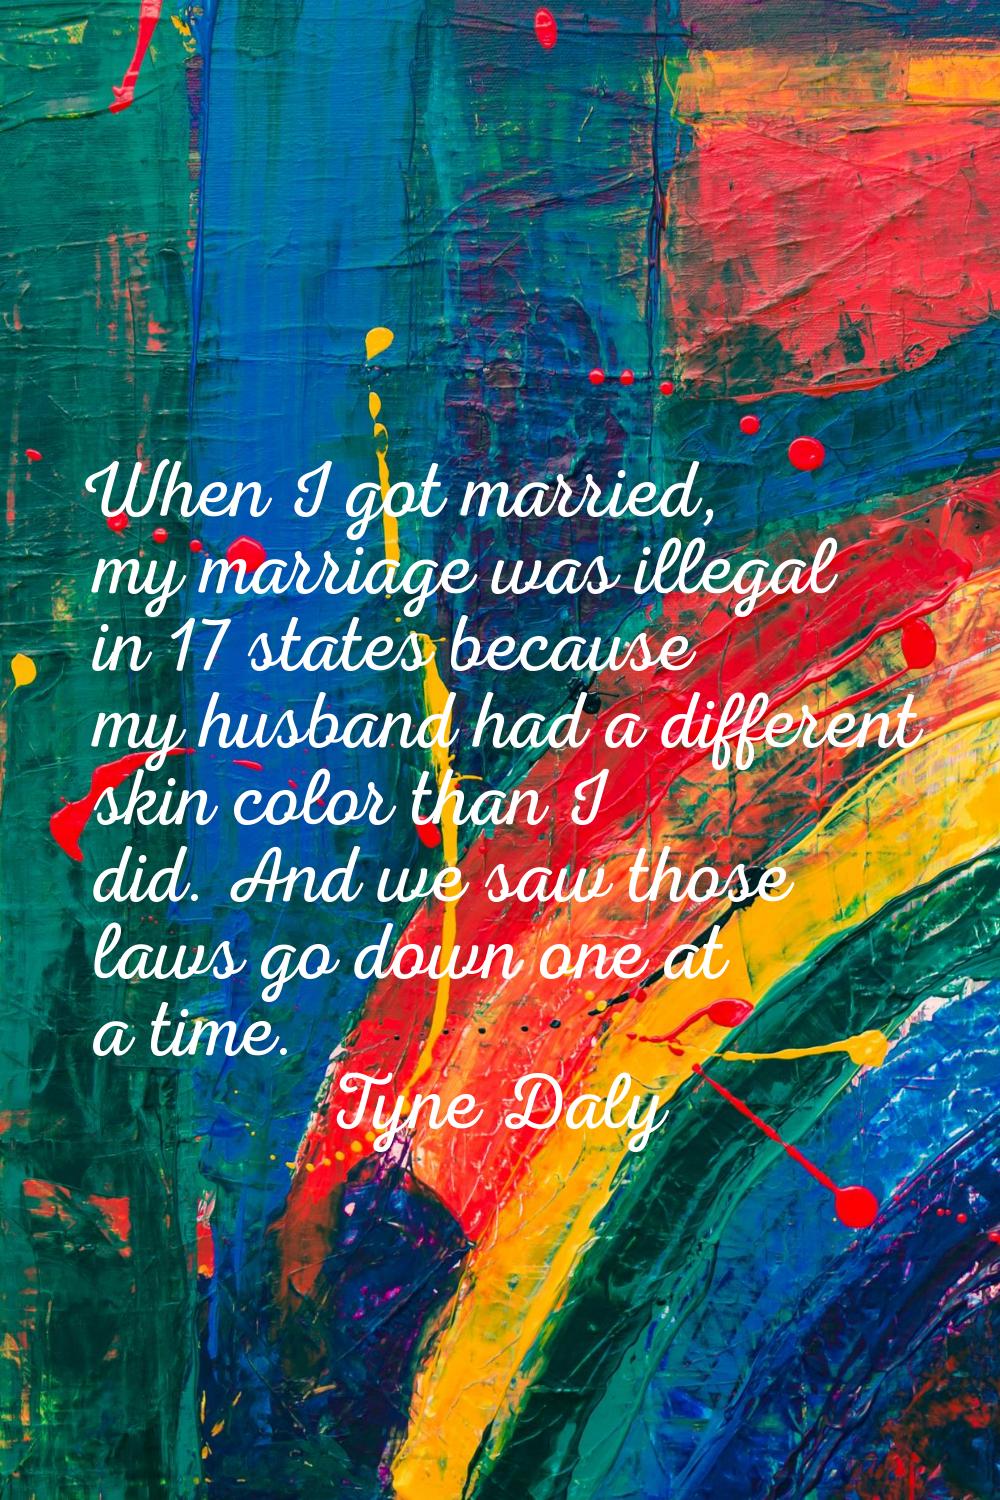 When I got married, my marriage was illegal in 17 states because my husband had a different skin co